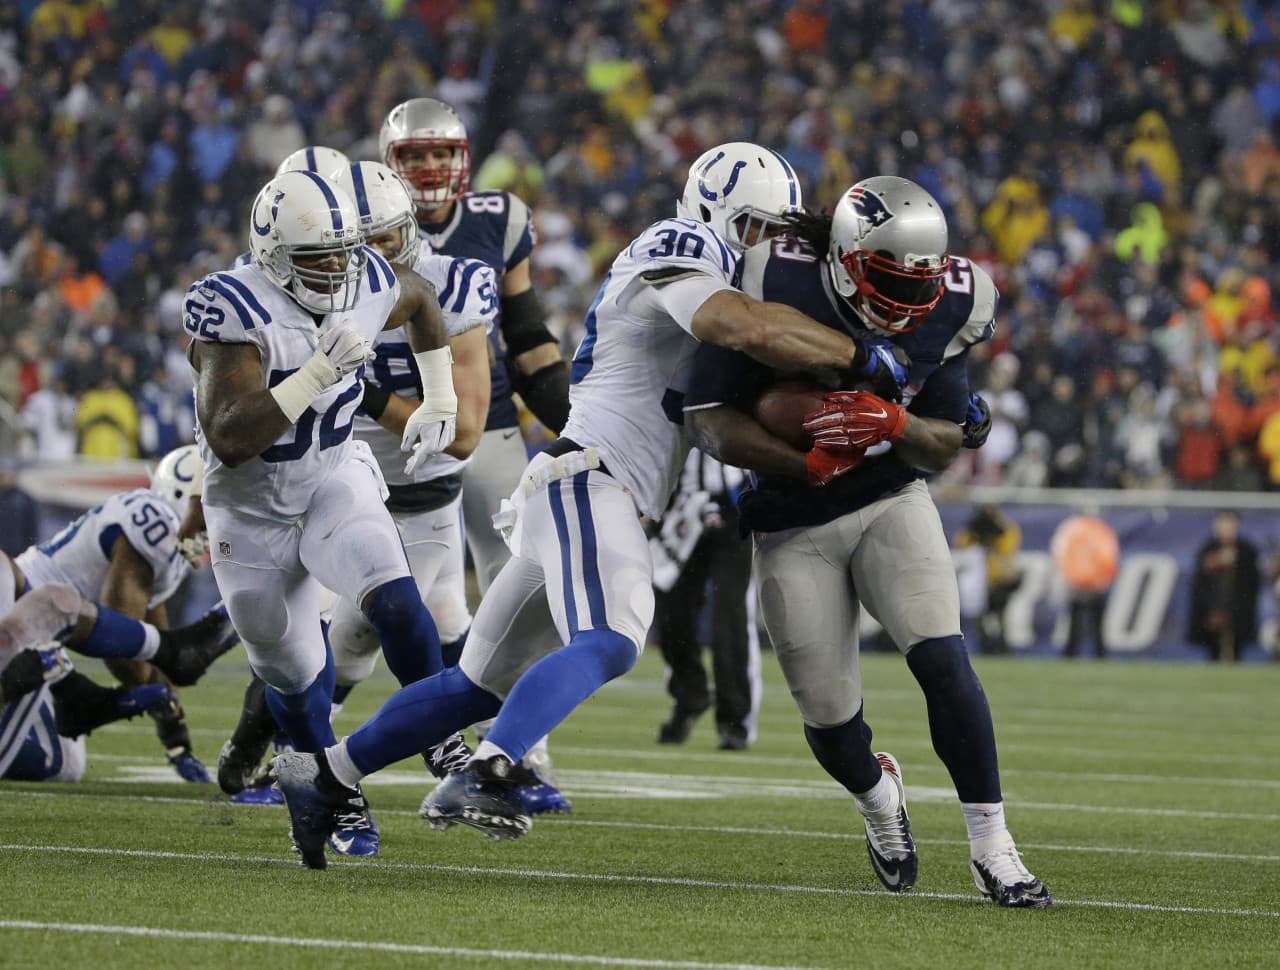 New England Patriots running back LeGarrette Blount (29) is tackled by Indianapolis Colts free safety LaRon Landry (30) during the second half of the AFC Championship. (Matt Slocum/AP)